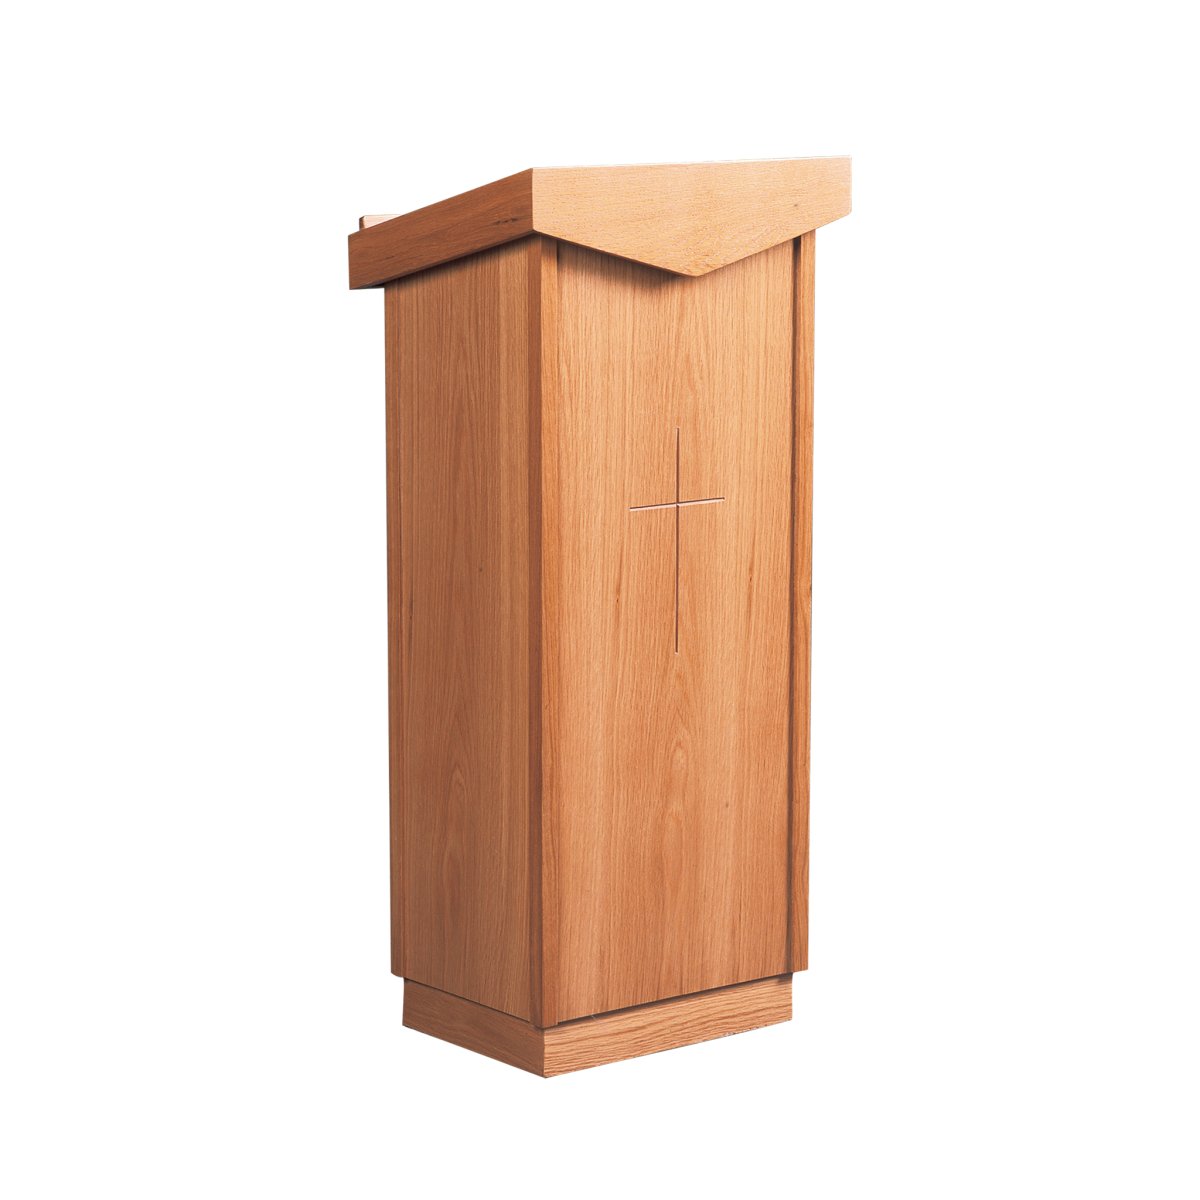 Incised Cross Lectern - Hayes & Finch